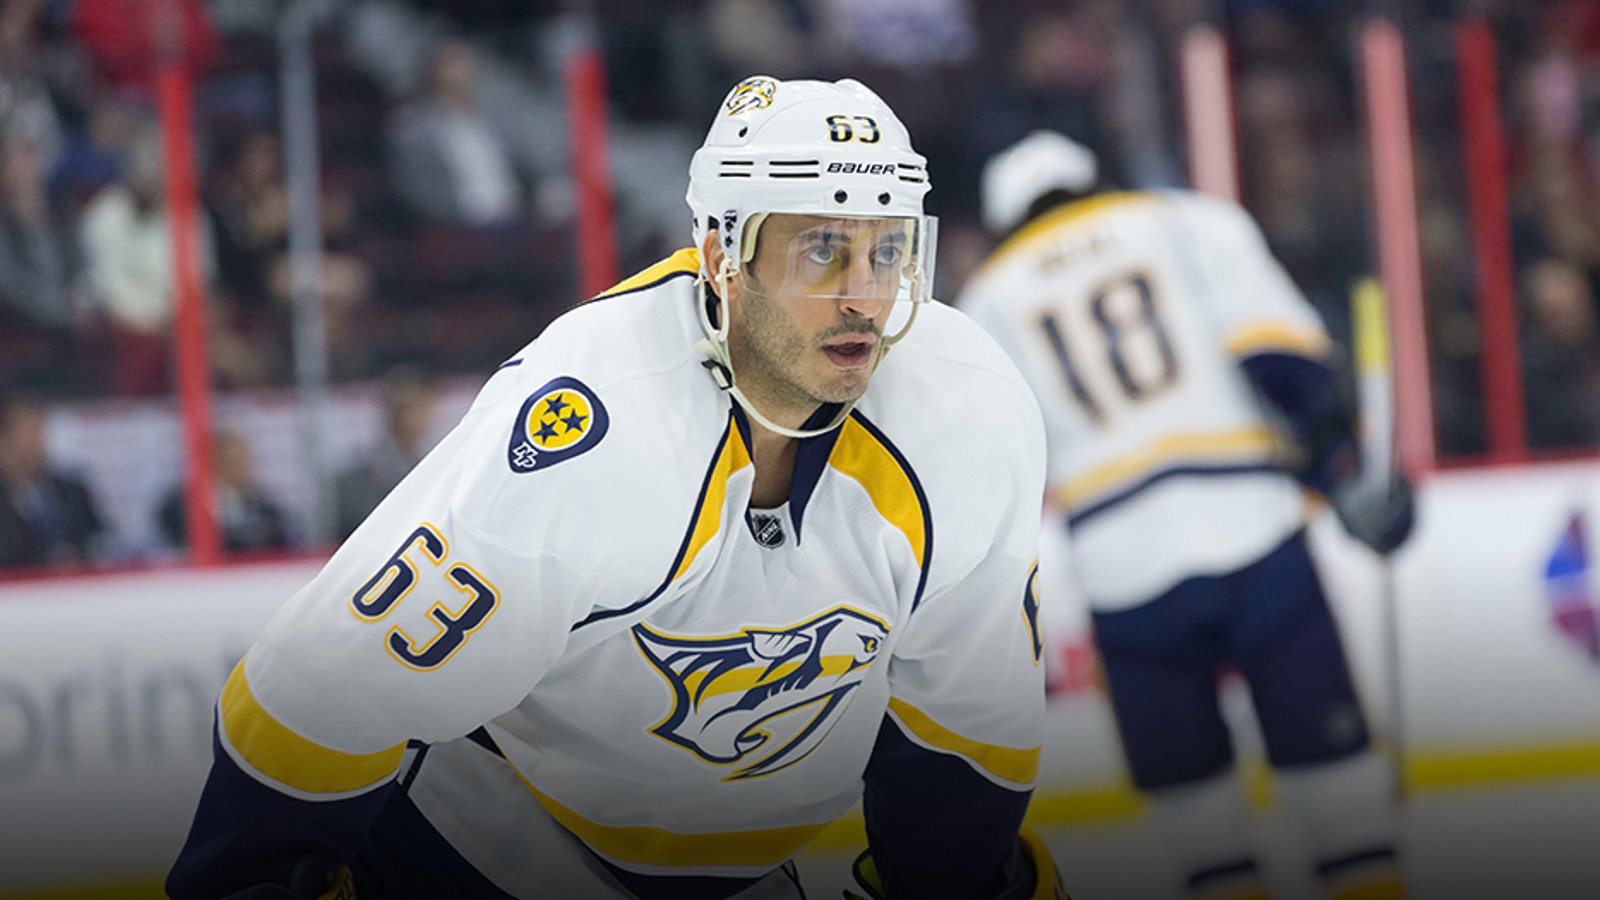 Report: 10 players who should get a PTO